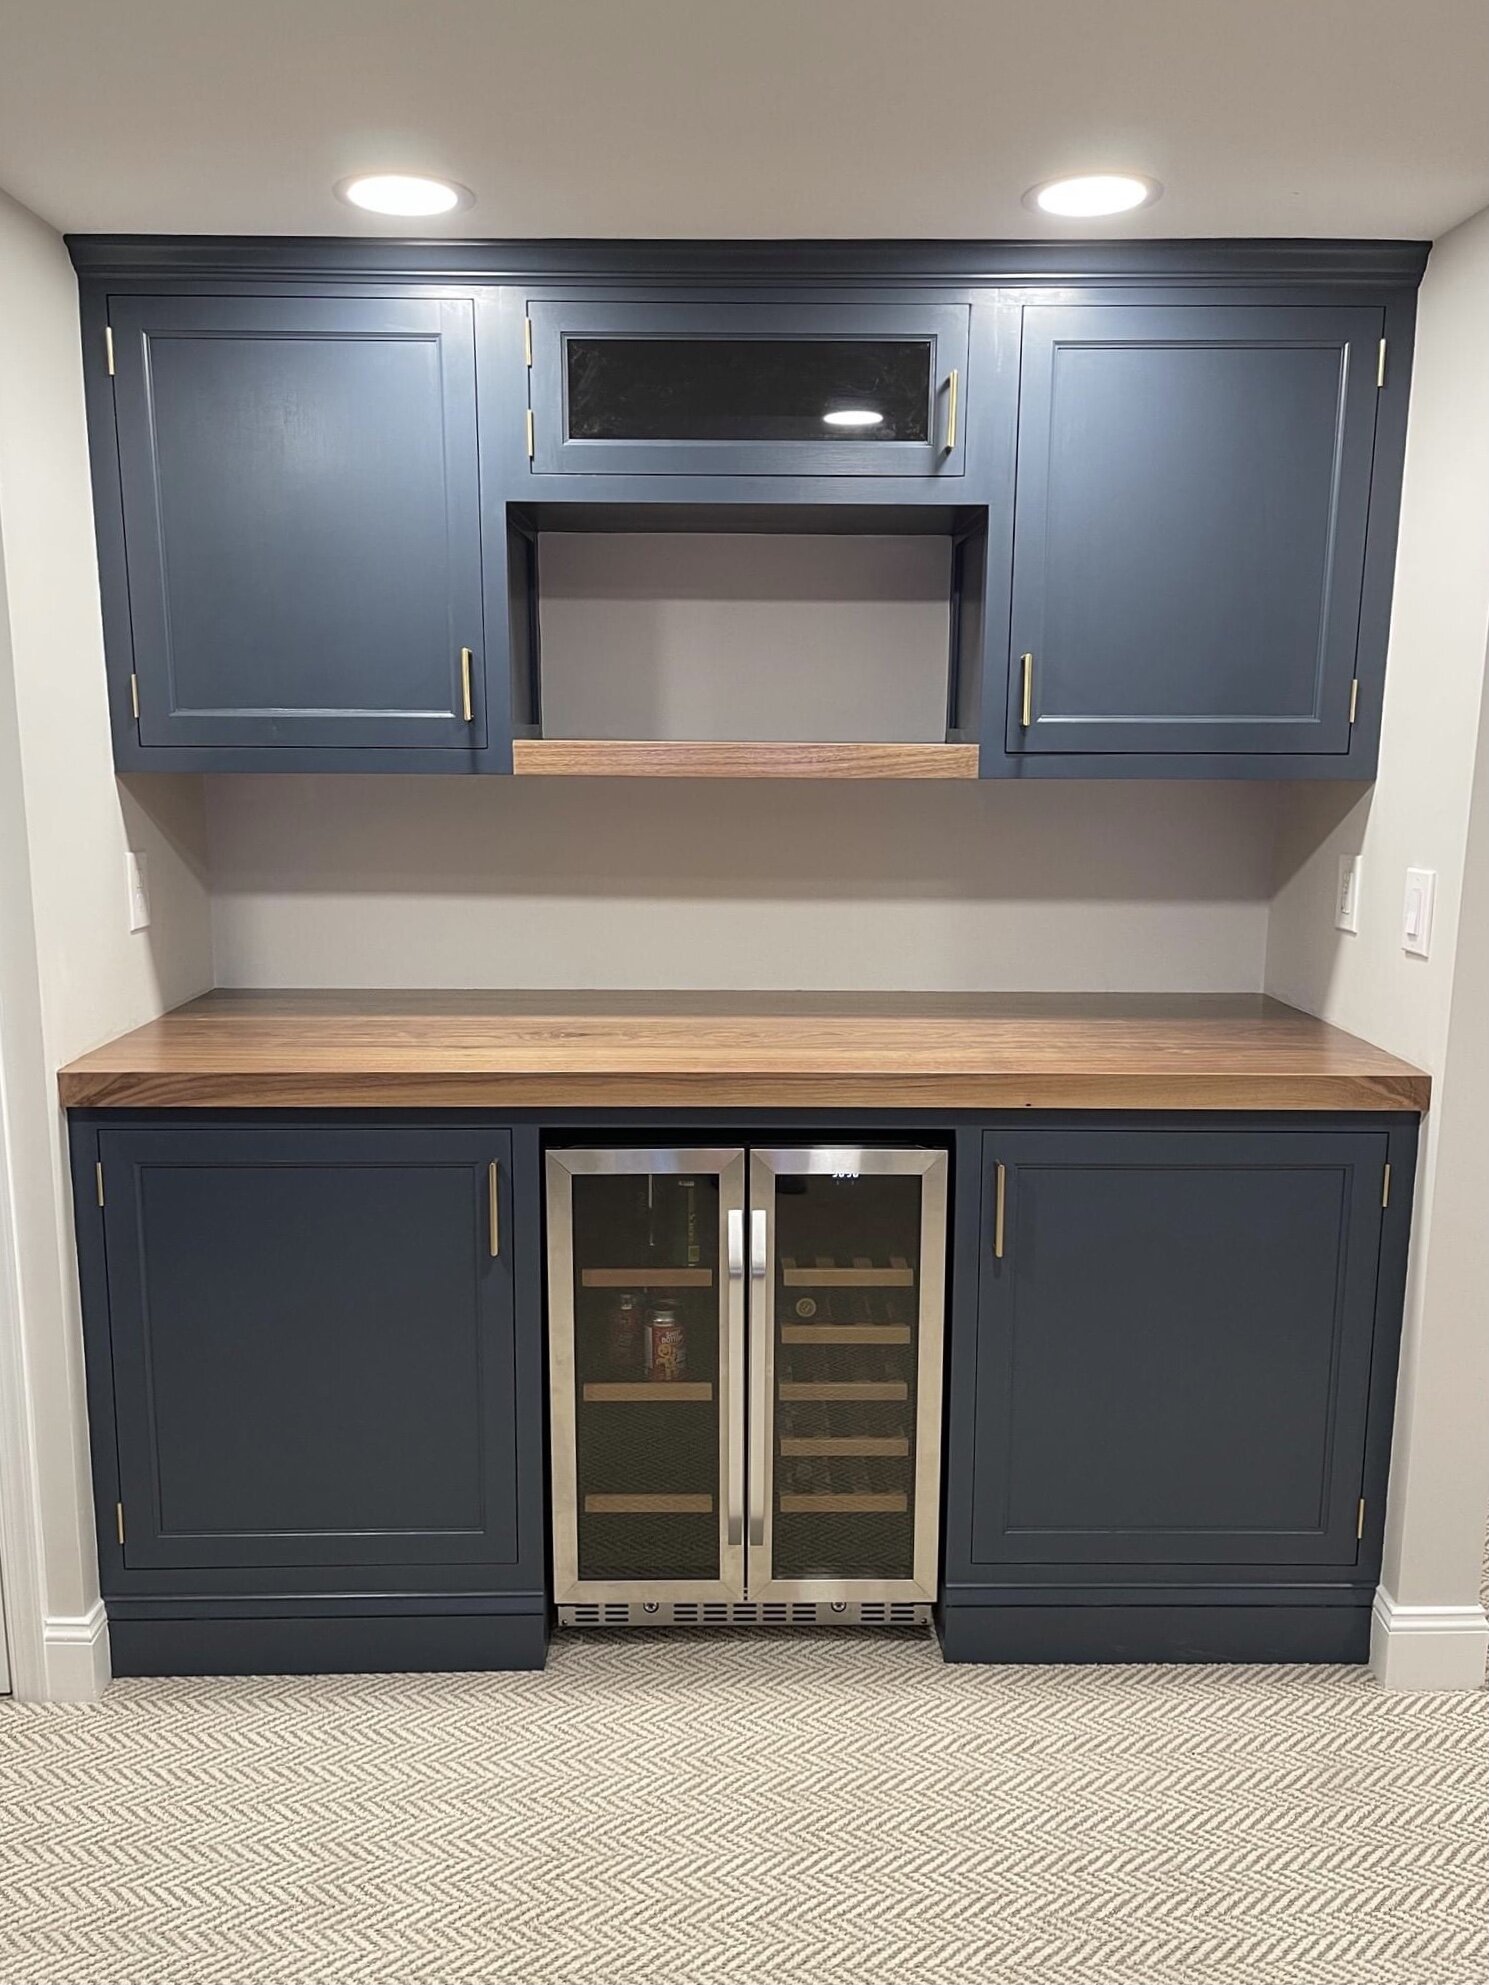  The finished project has inset flat panel doors, a black walnut countertop and shelf, and is painted in the Benjamin Moore color Hale Navy.   